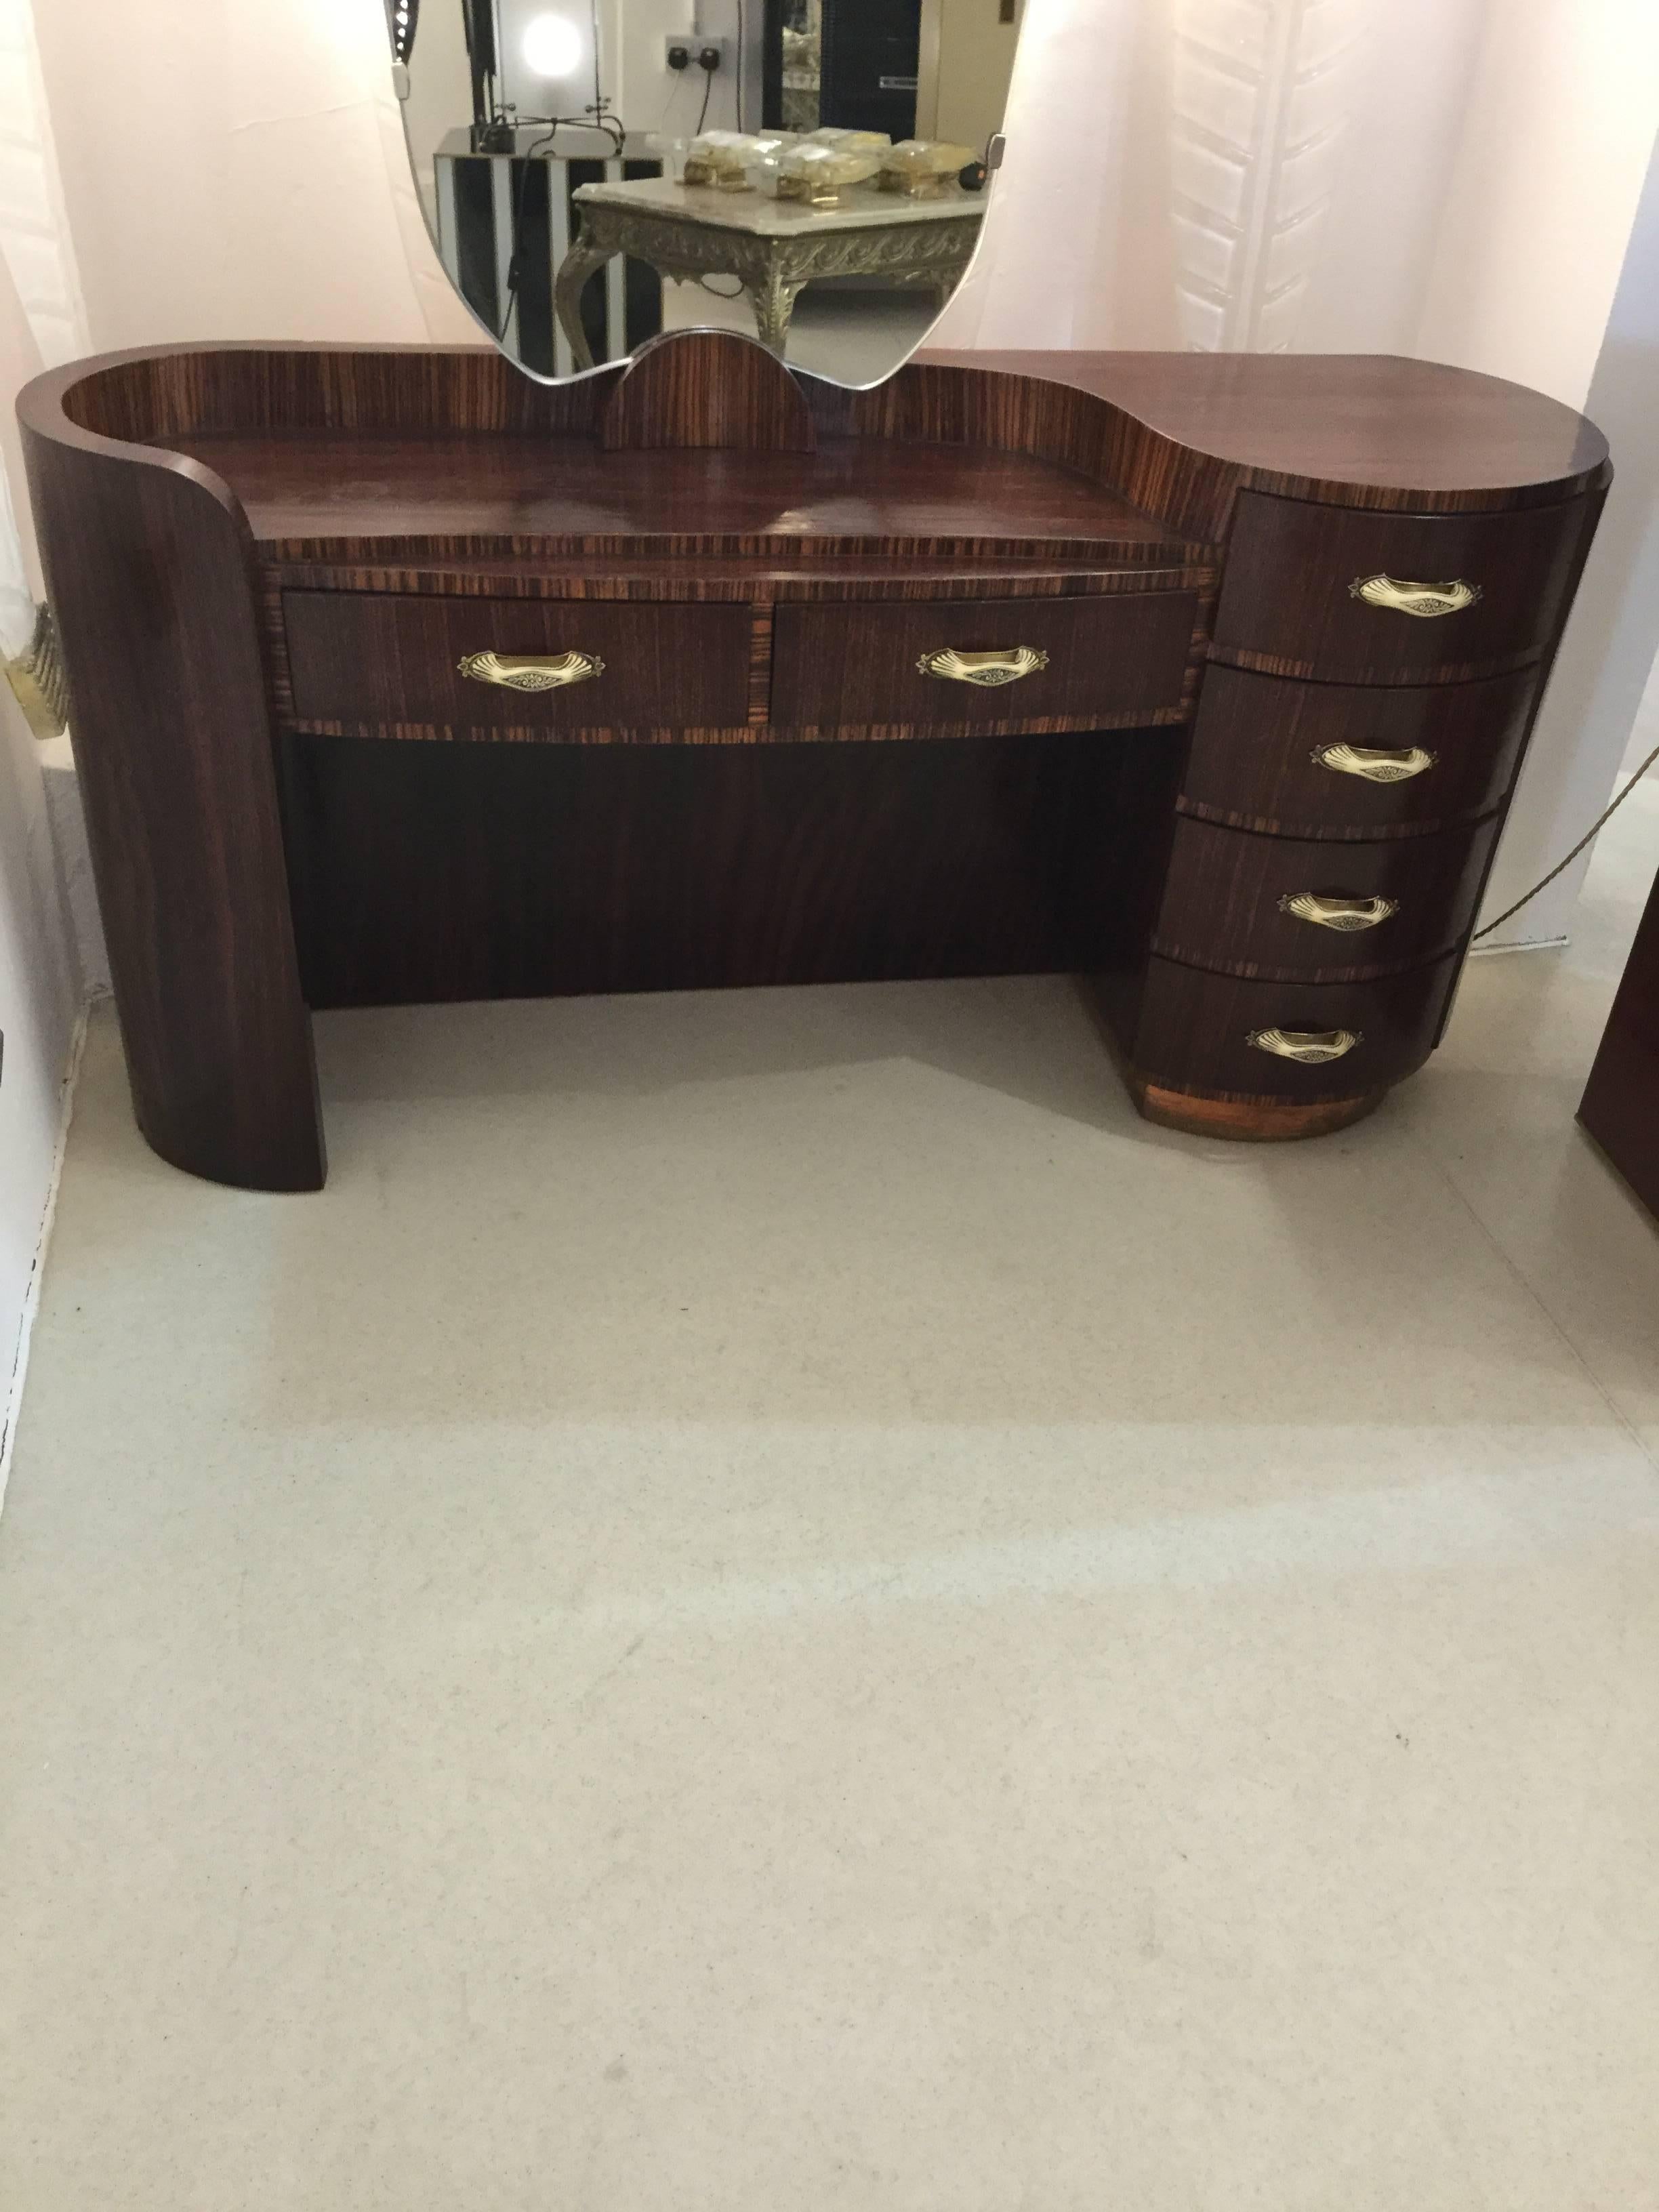 A beautifully elegant dressing table in rosewood. The center piece presents two drawers, while the side one has six.
In excellent condition.